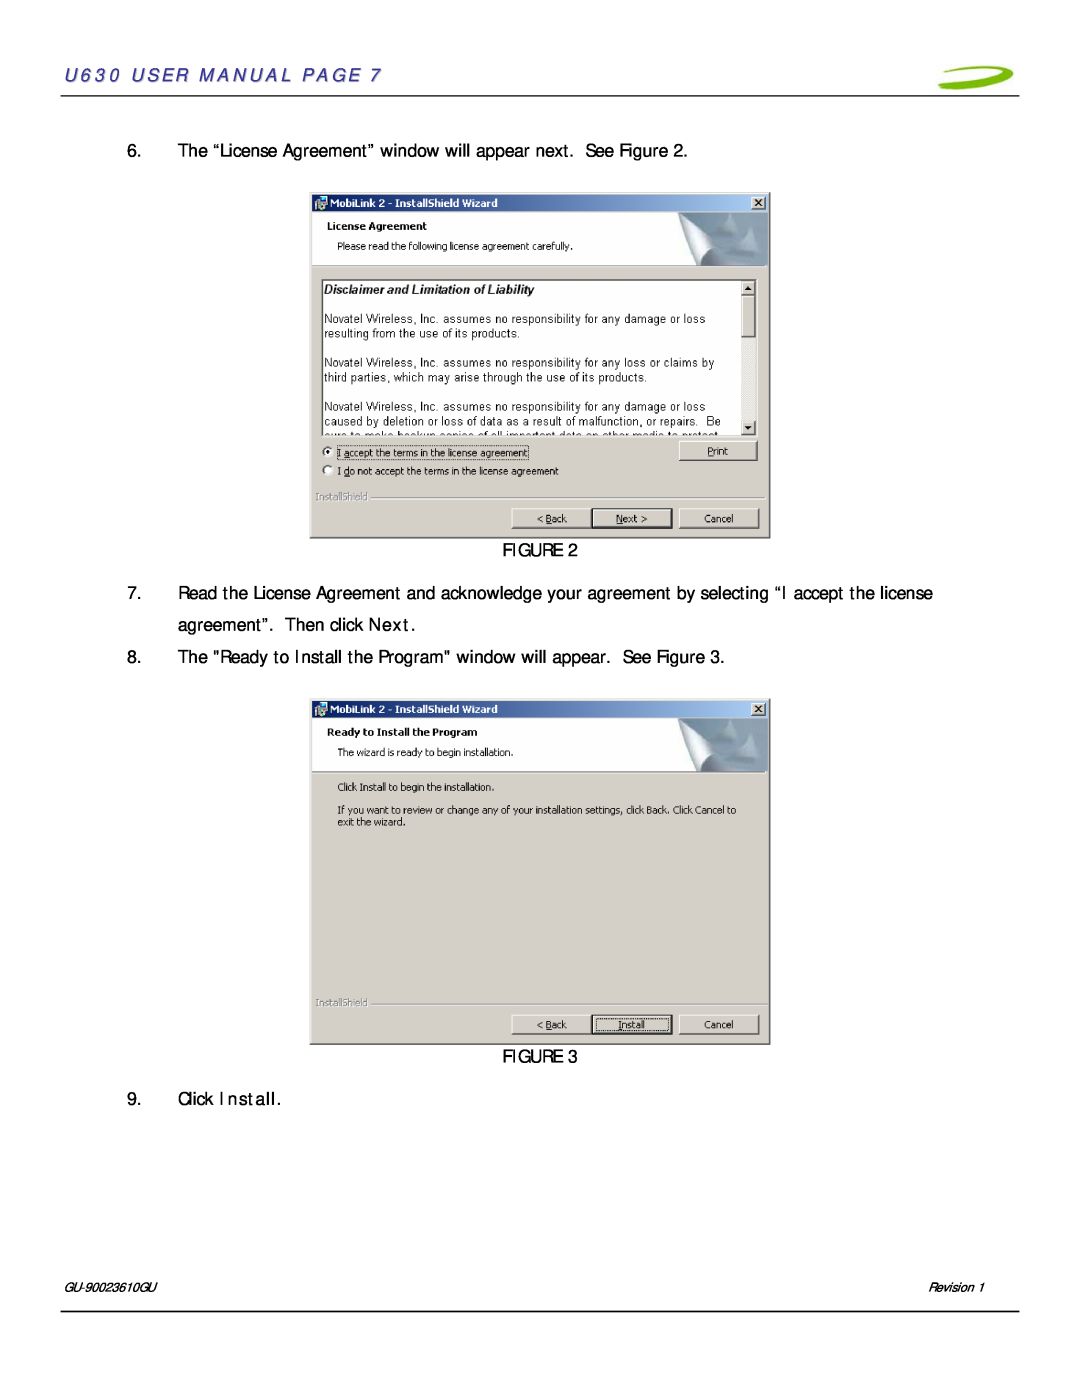 InFocus U630 USER MANUAL PAGE, The “License Agreement” window will appear next. See Figure, Click Install, Revision 